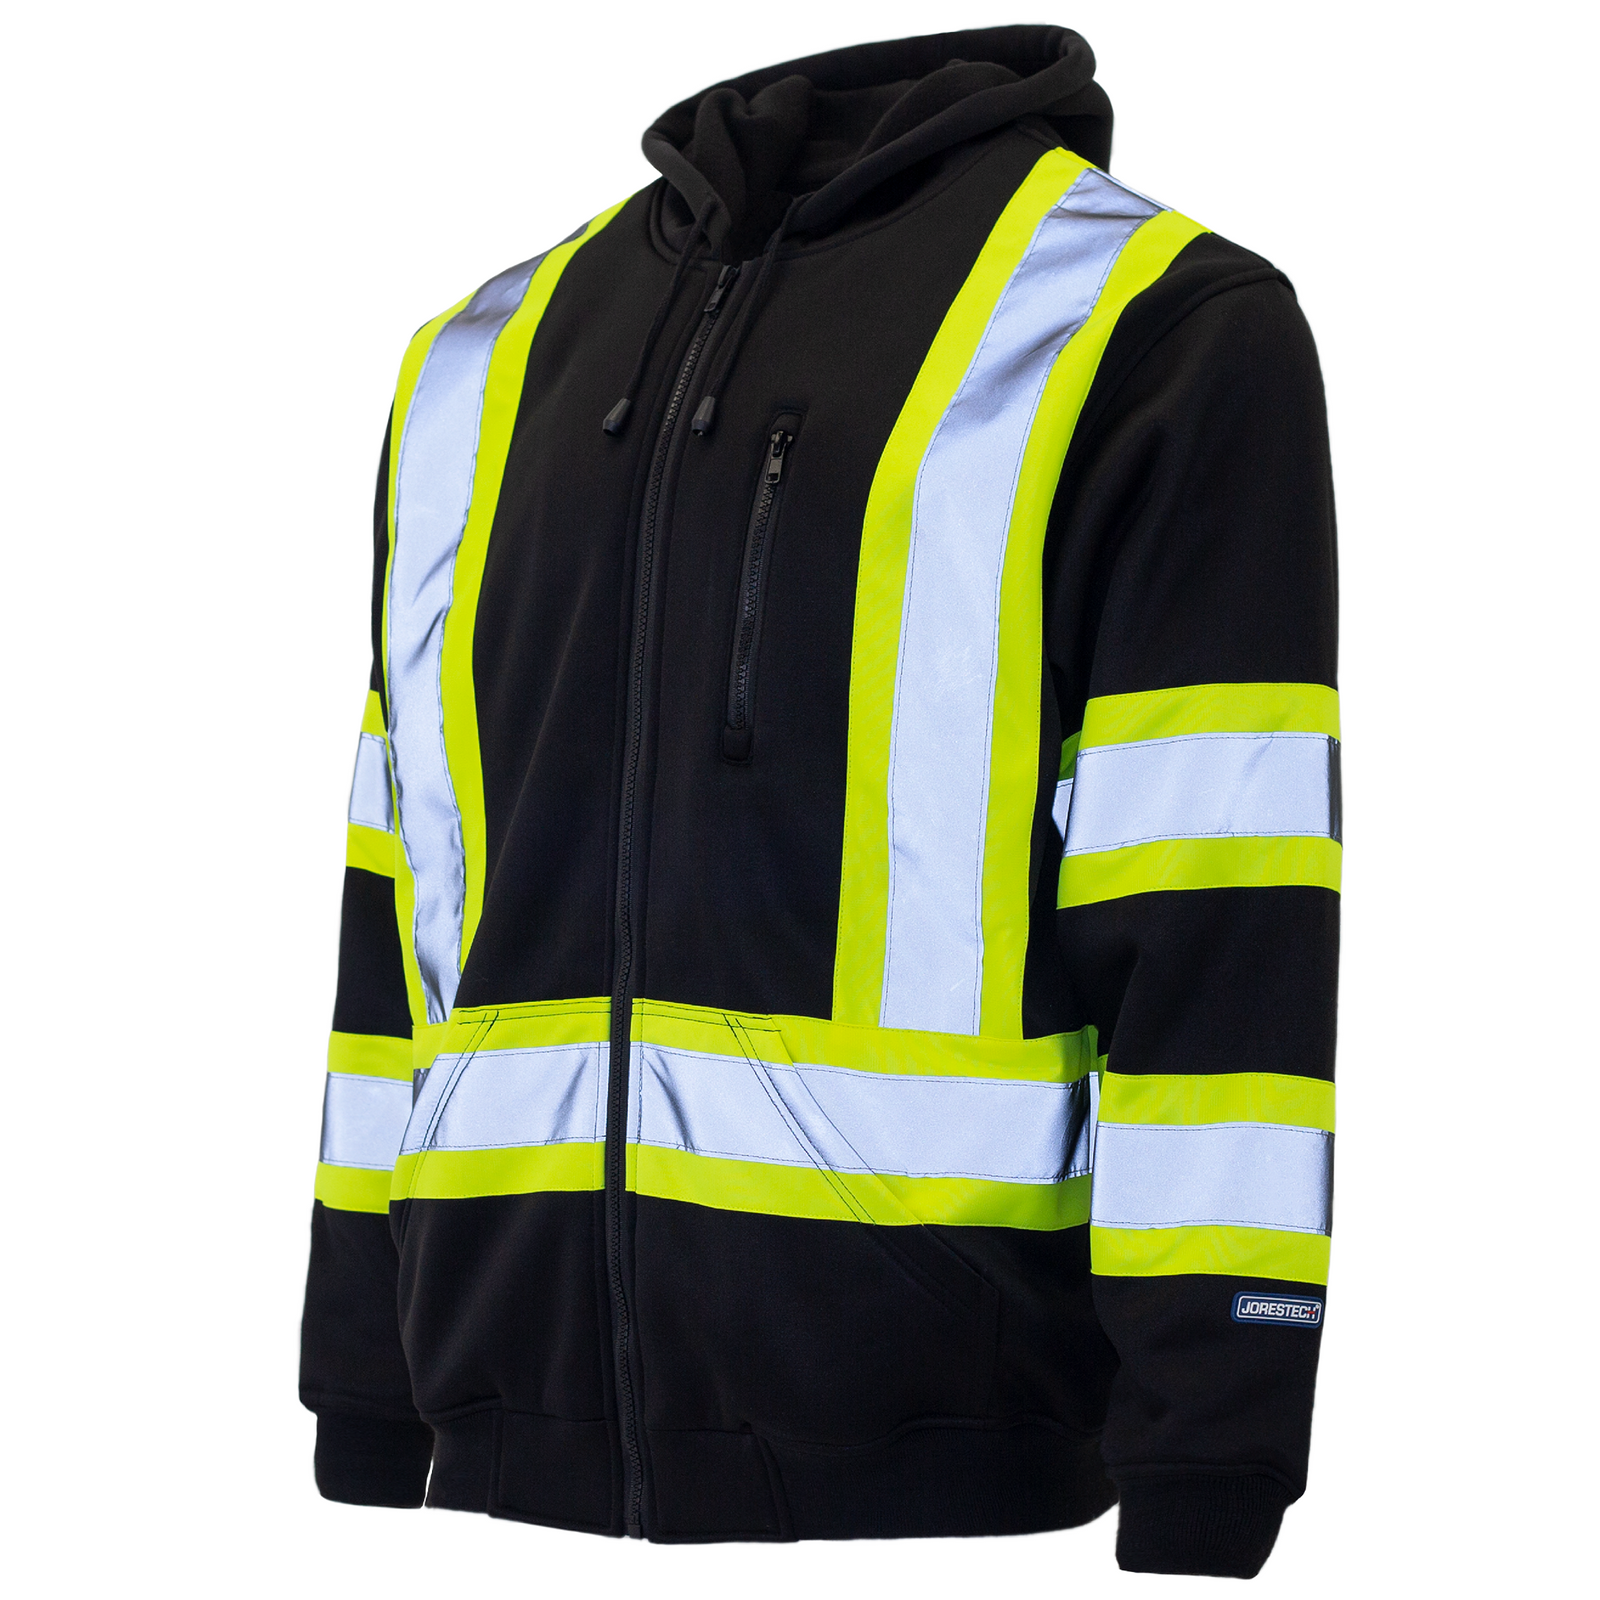 Diagonal view of the JORESTECH hi-vis safety hooded black and yellow sweatshirt with reflective stripes